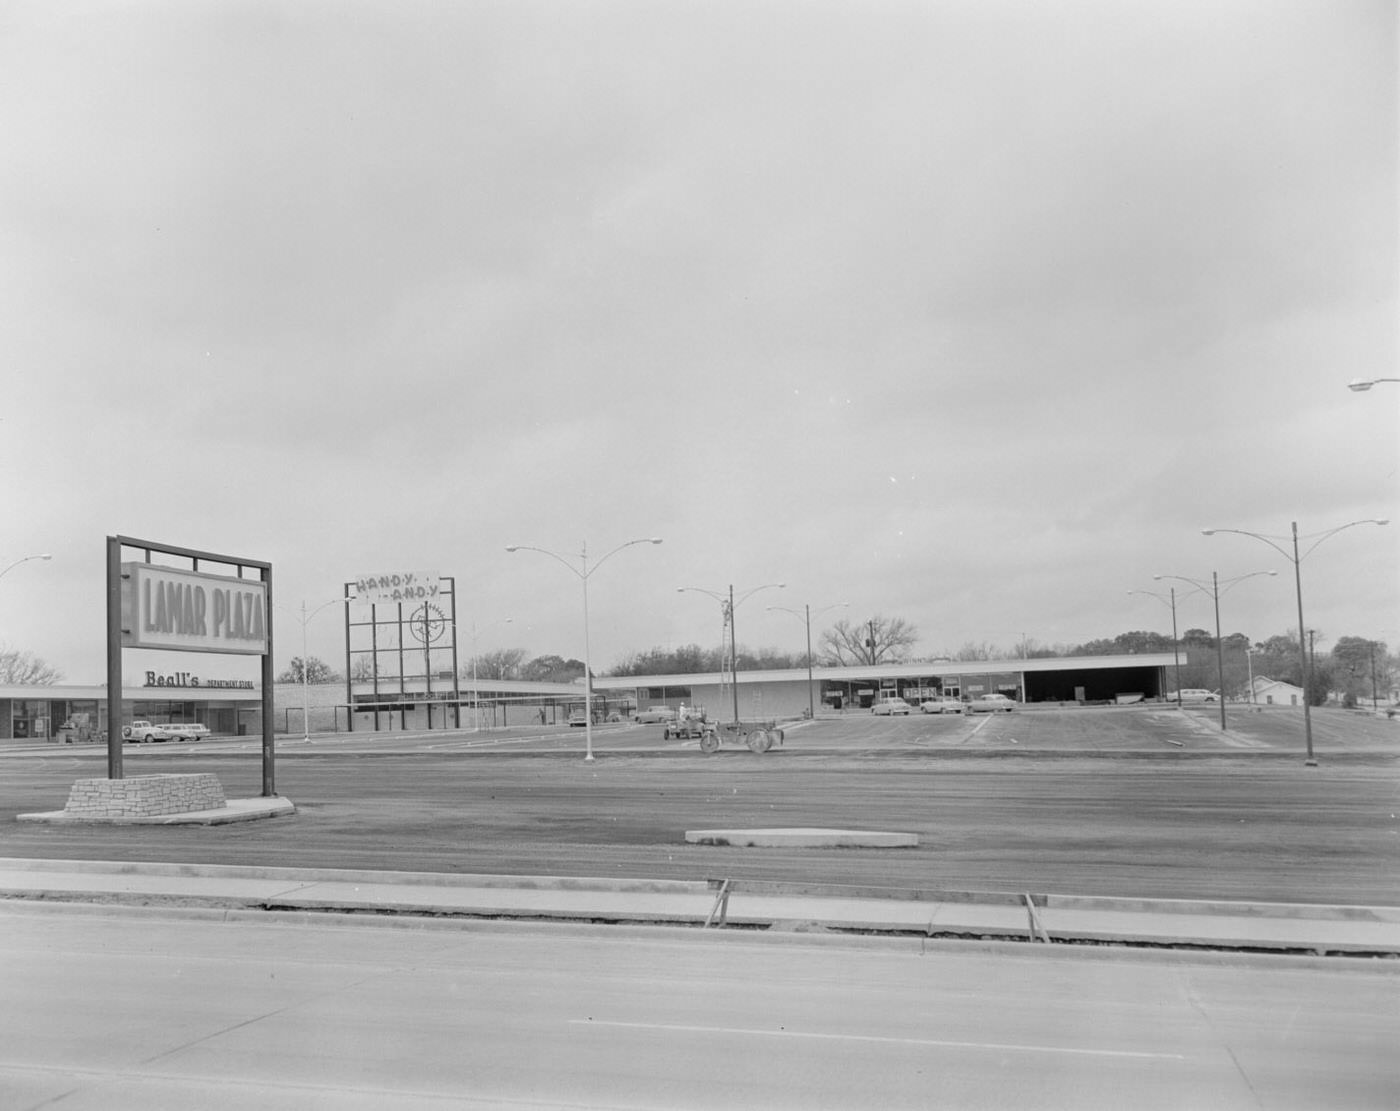 Lamar Plaza Parking Lot and Stores in Background, 1958.